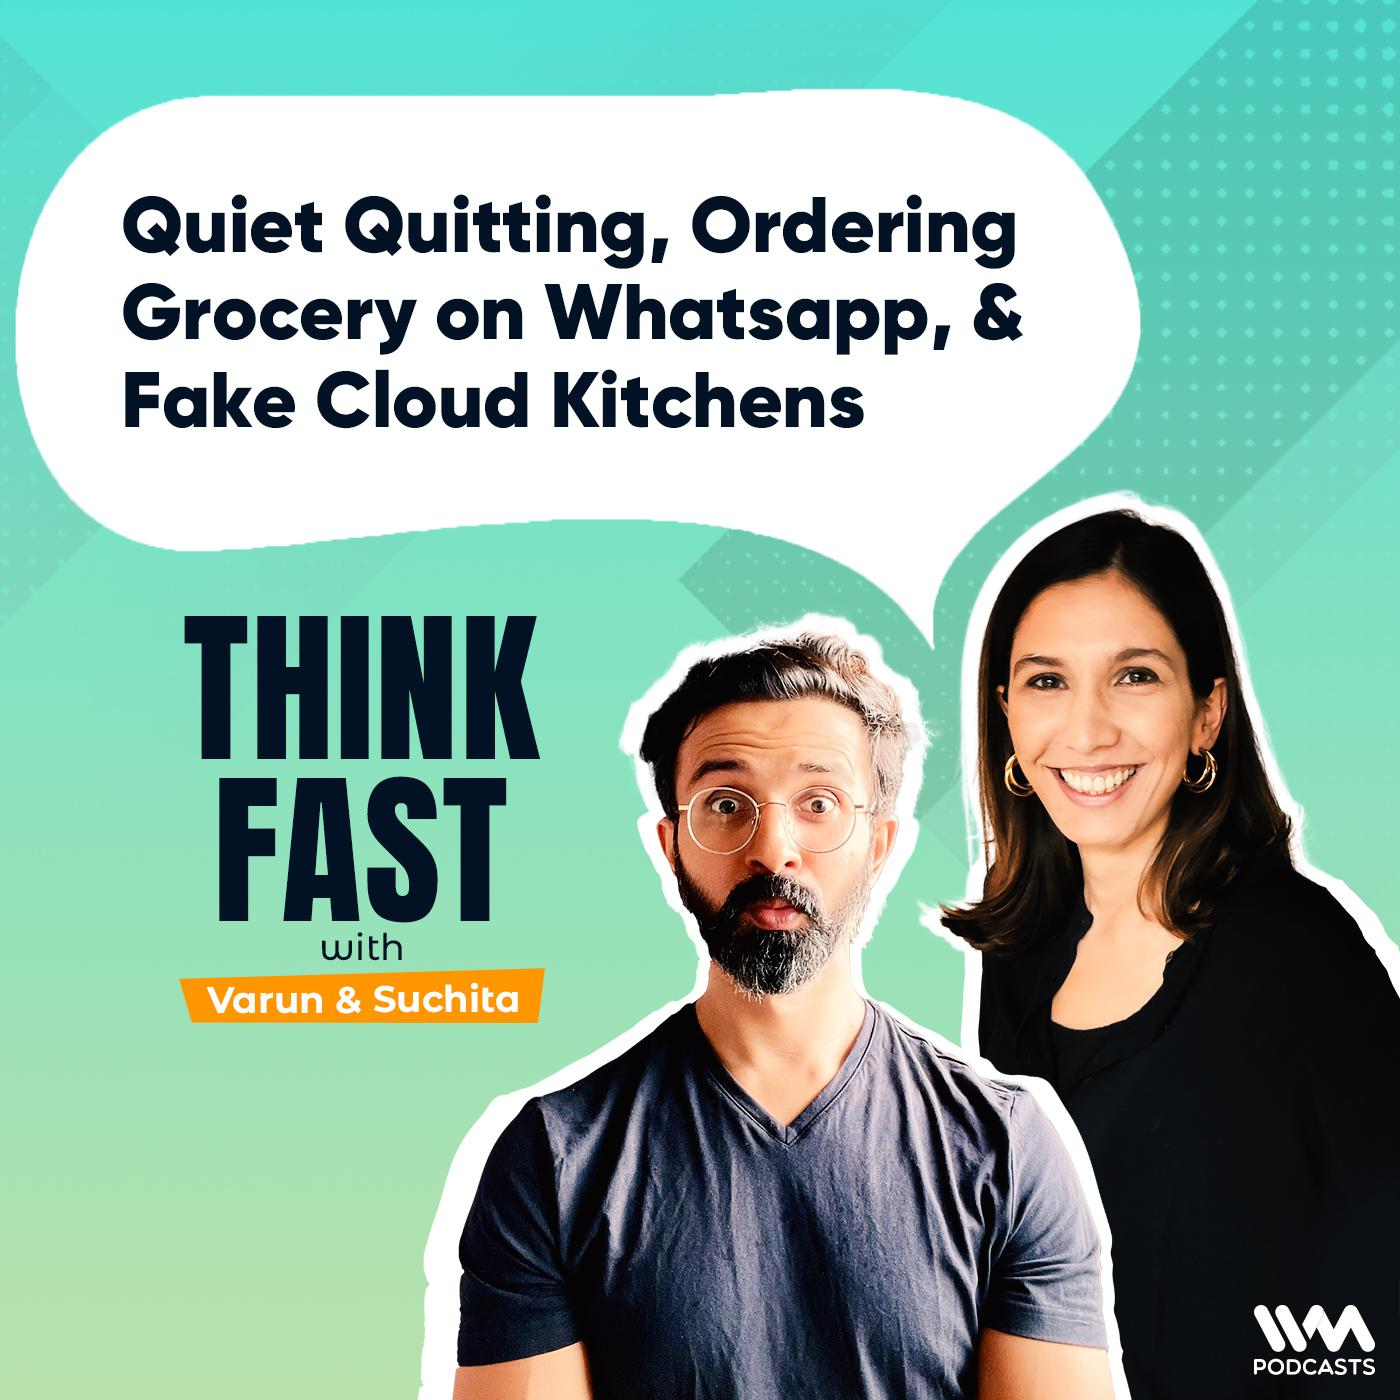 Quiet Quitting, Ordering Grocery on Whatsapp, & Fake Cloud Kitchens